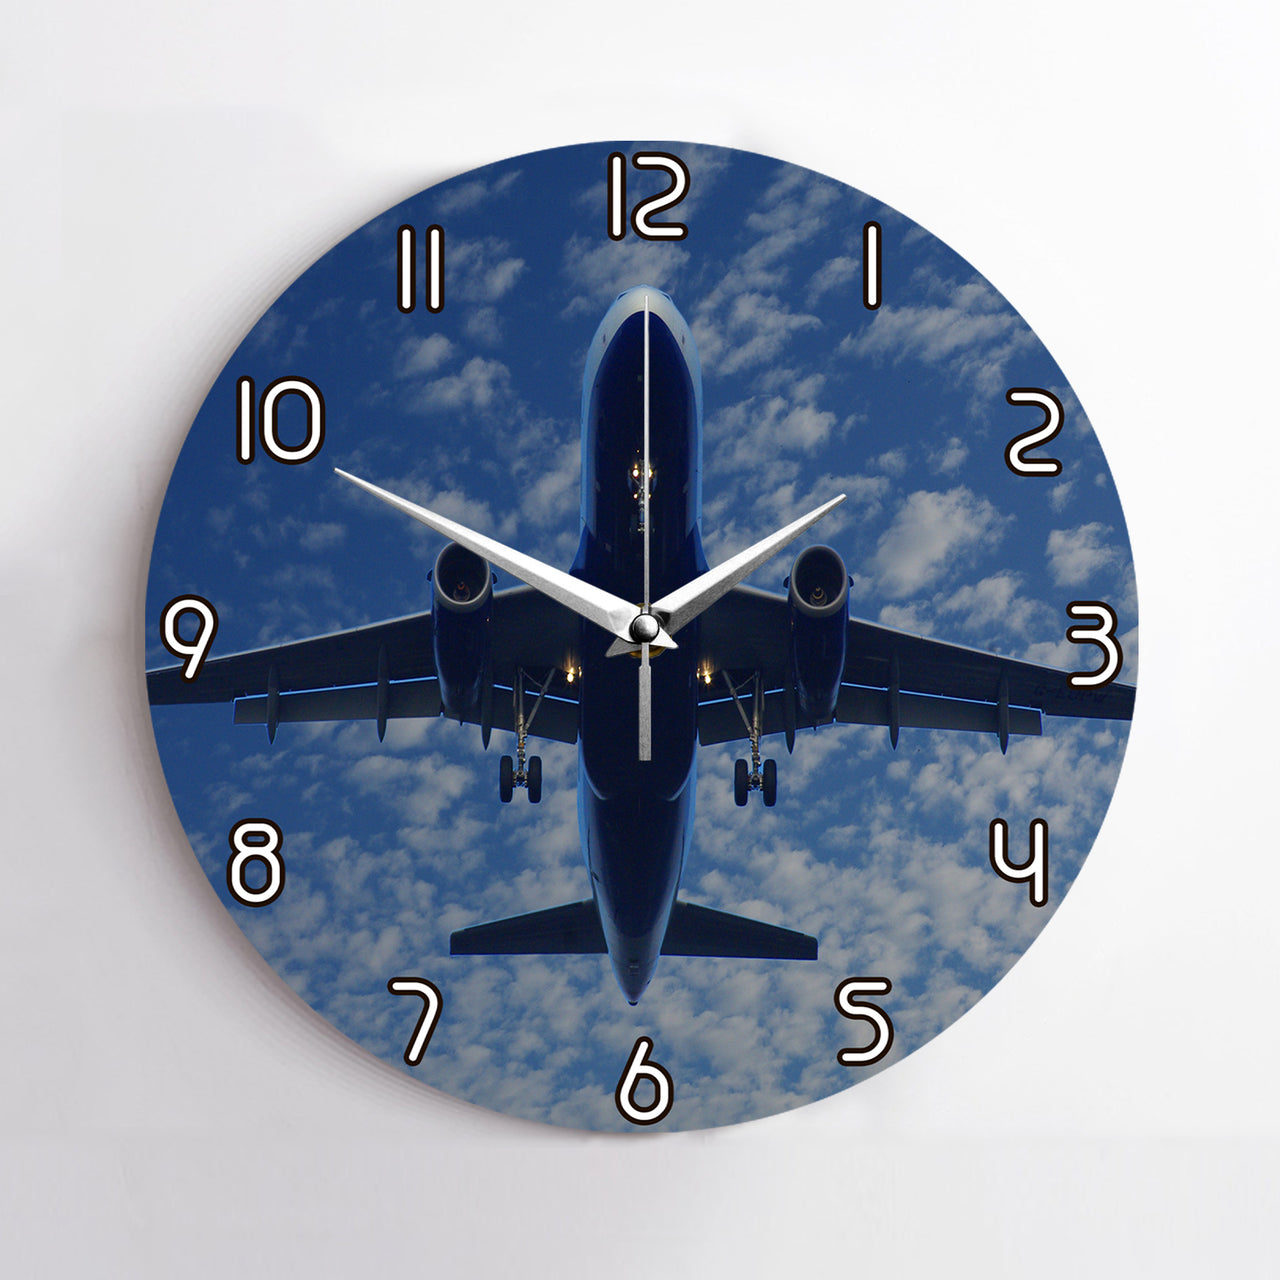 Airplane From Below Designed Wall Clocks